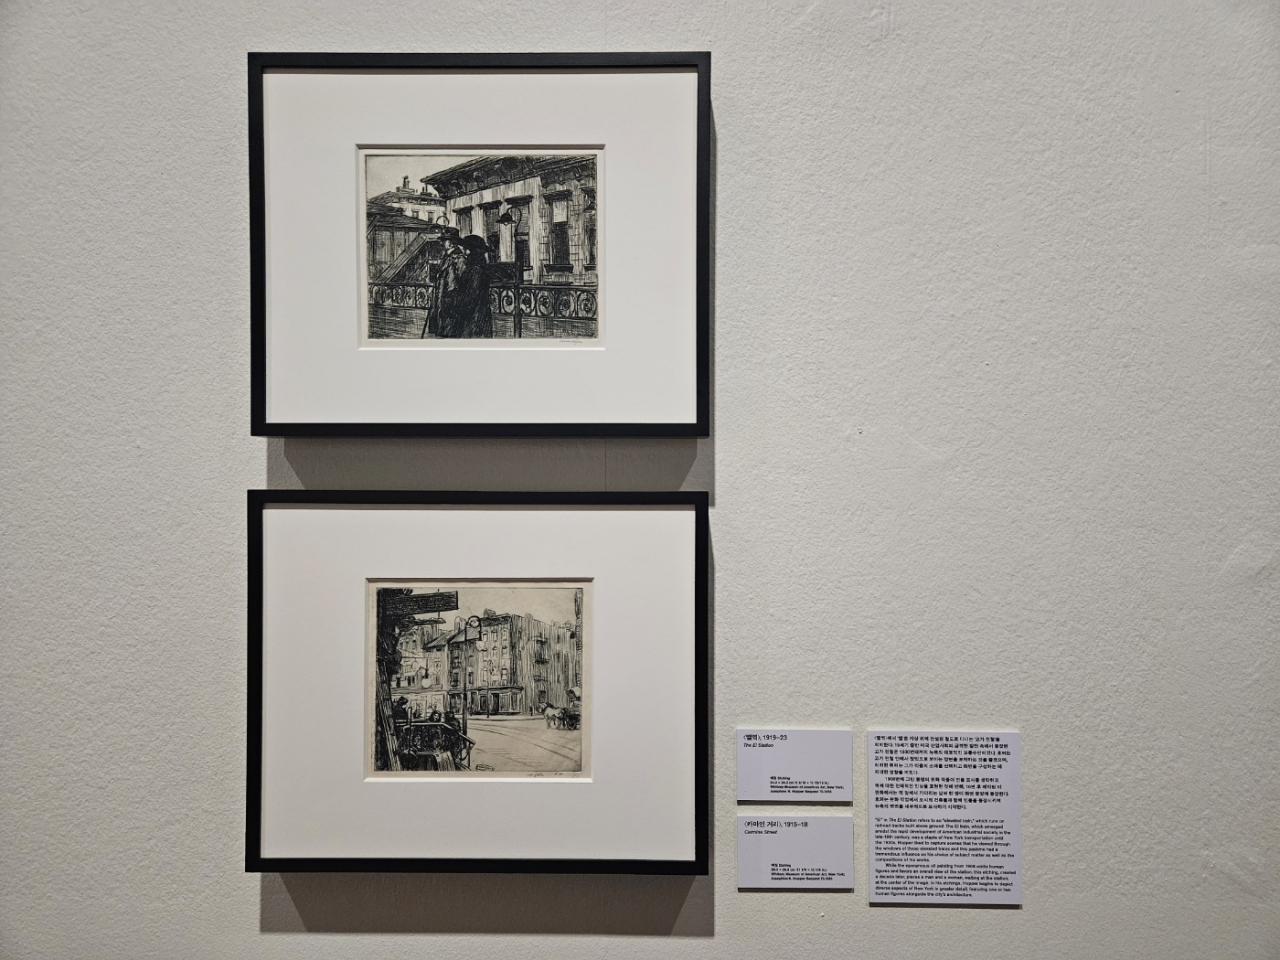 Works of etching by Edward Hopper are featured at “Edward Hopper: From City to Coast” at Seoul Museum of Art. (Park Yuna/The Korea Herald)